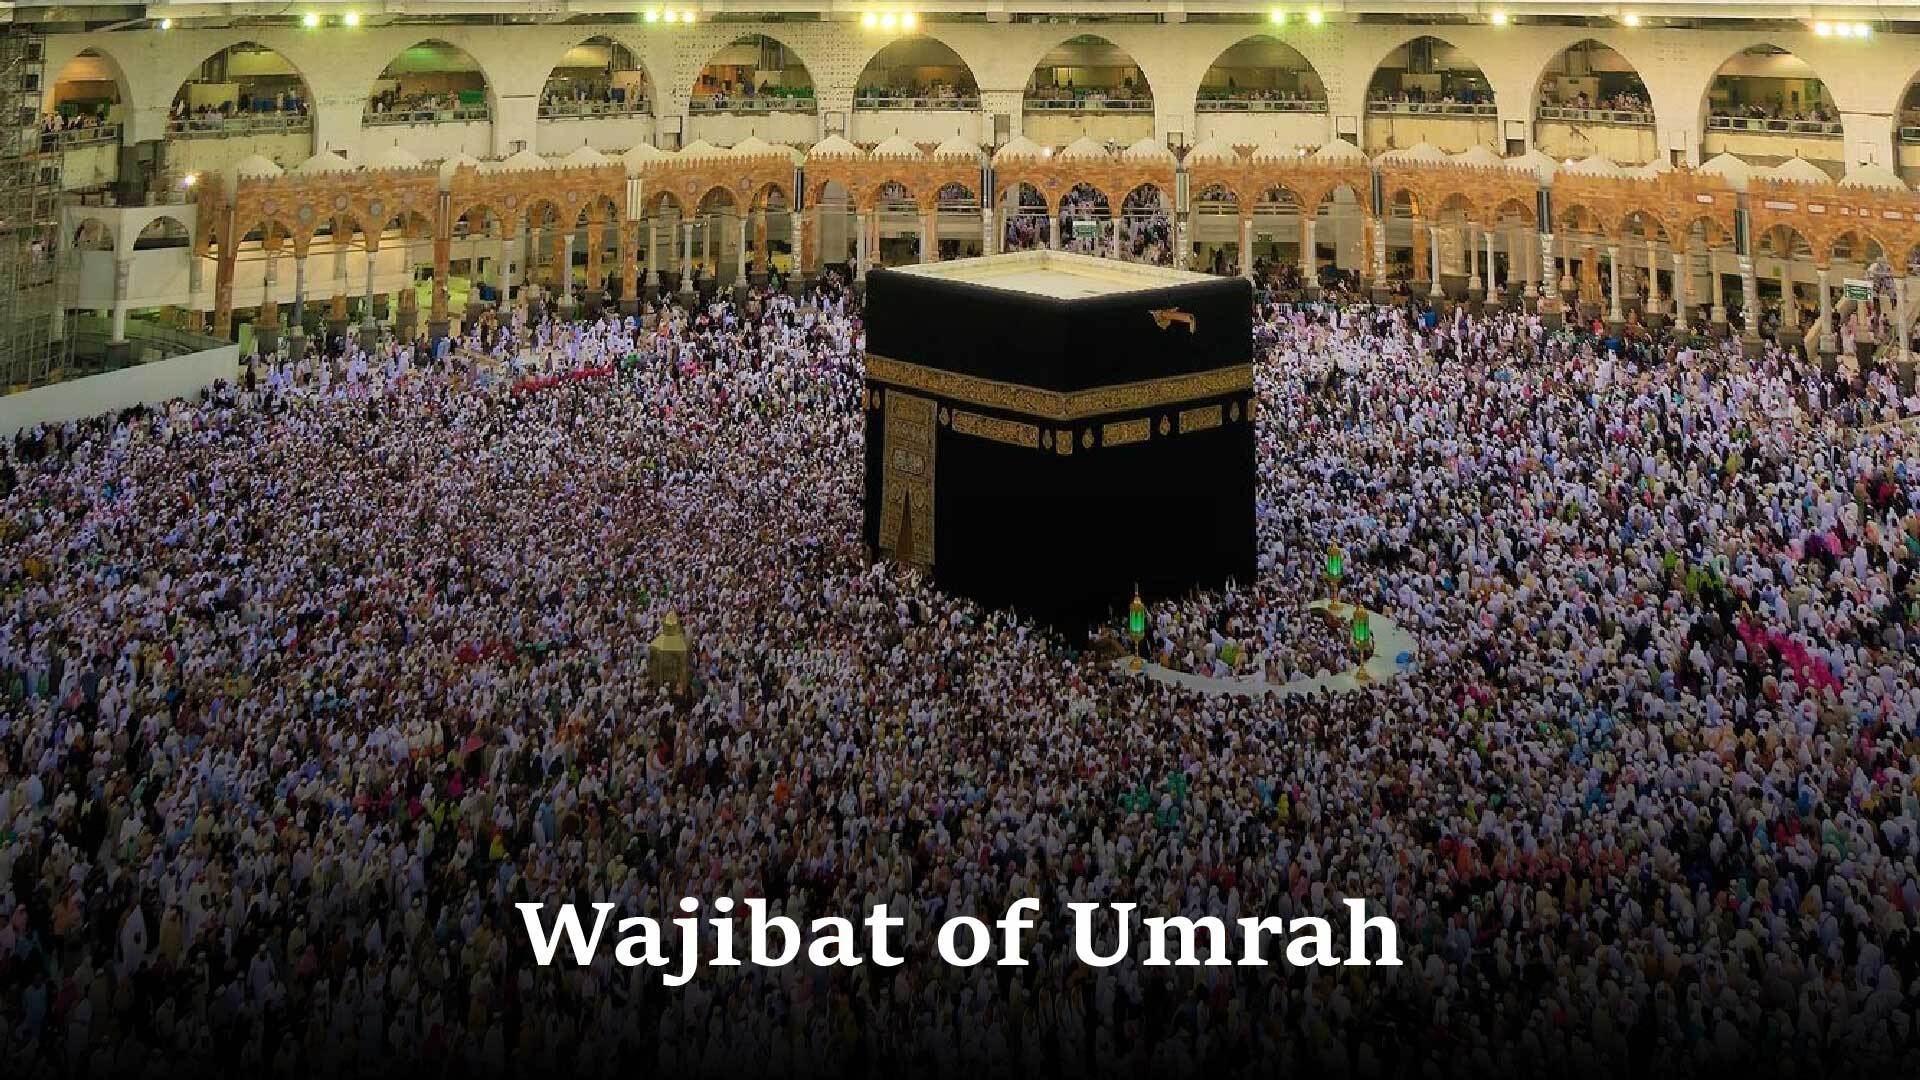 Tenets and Obligations of Umrah